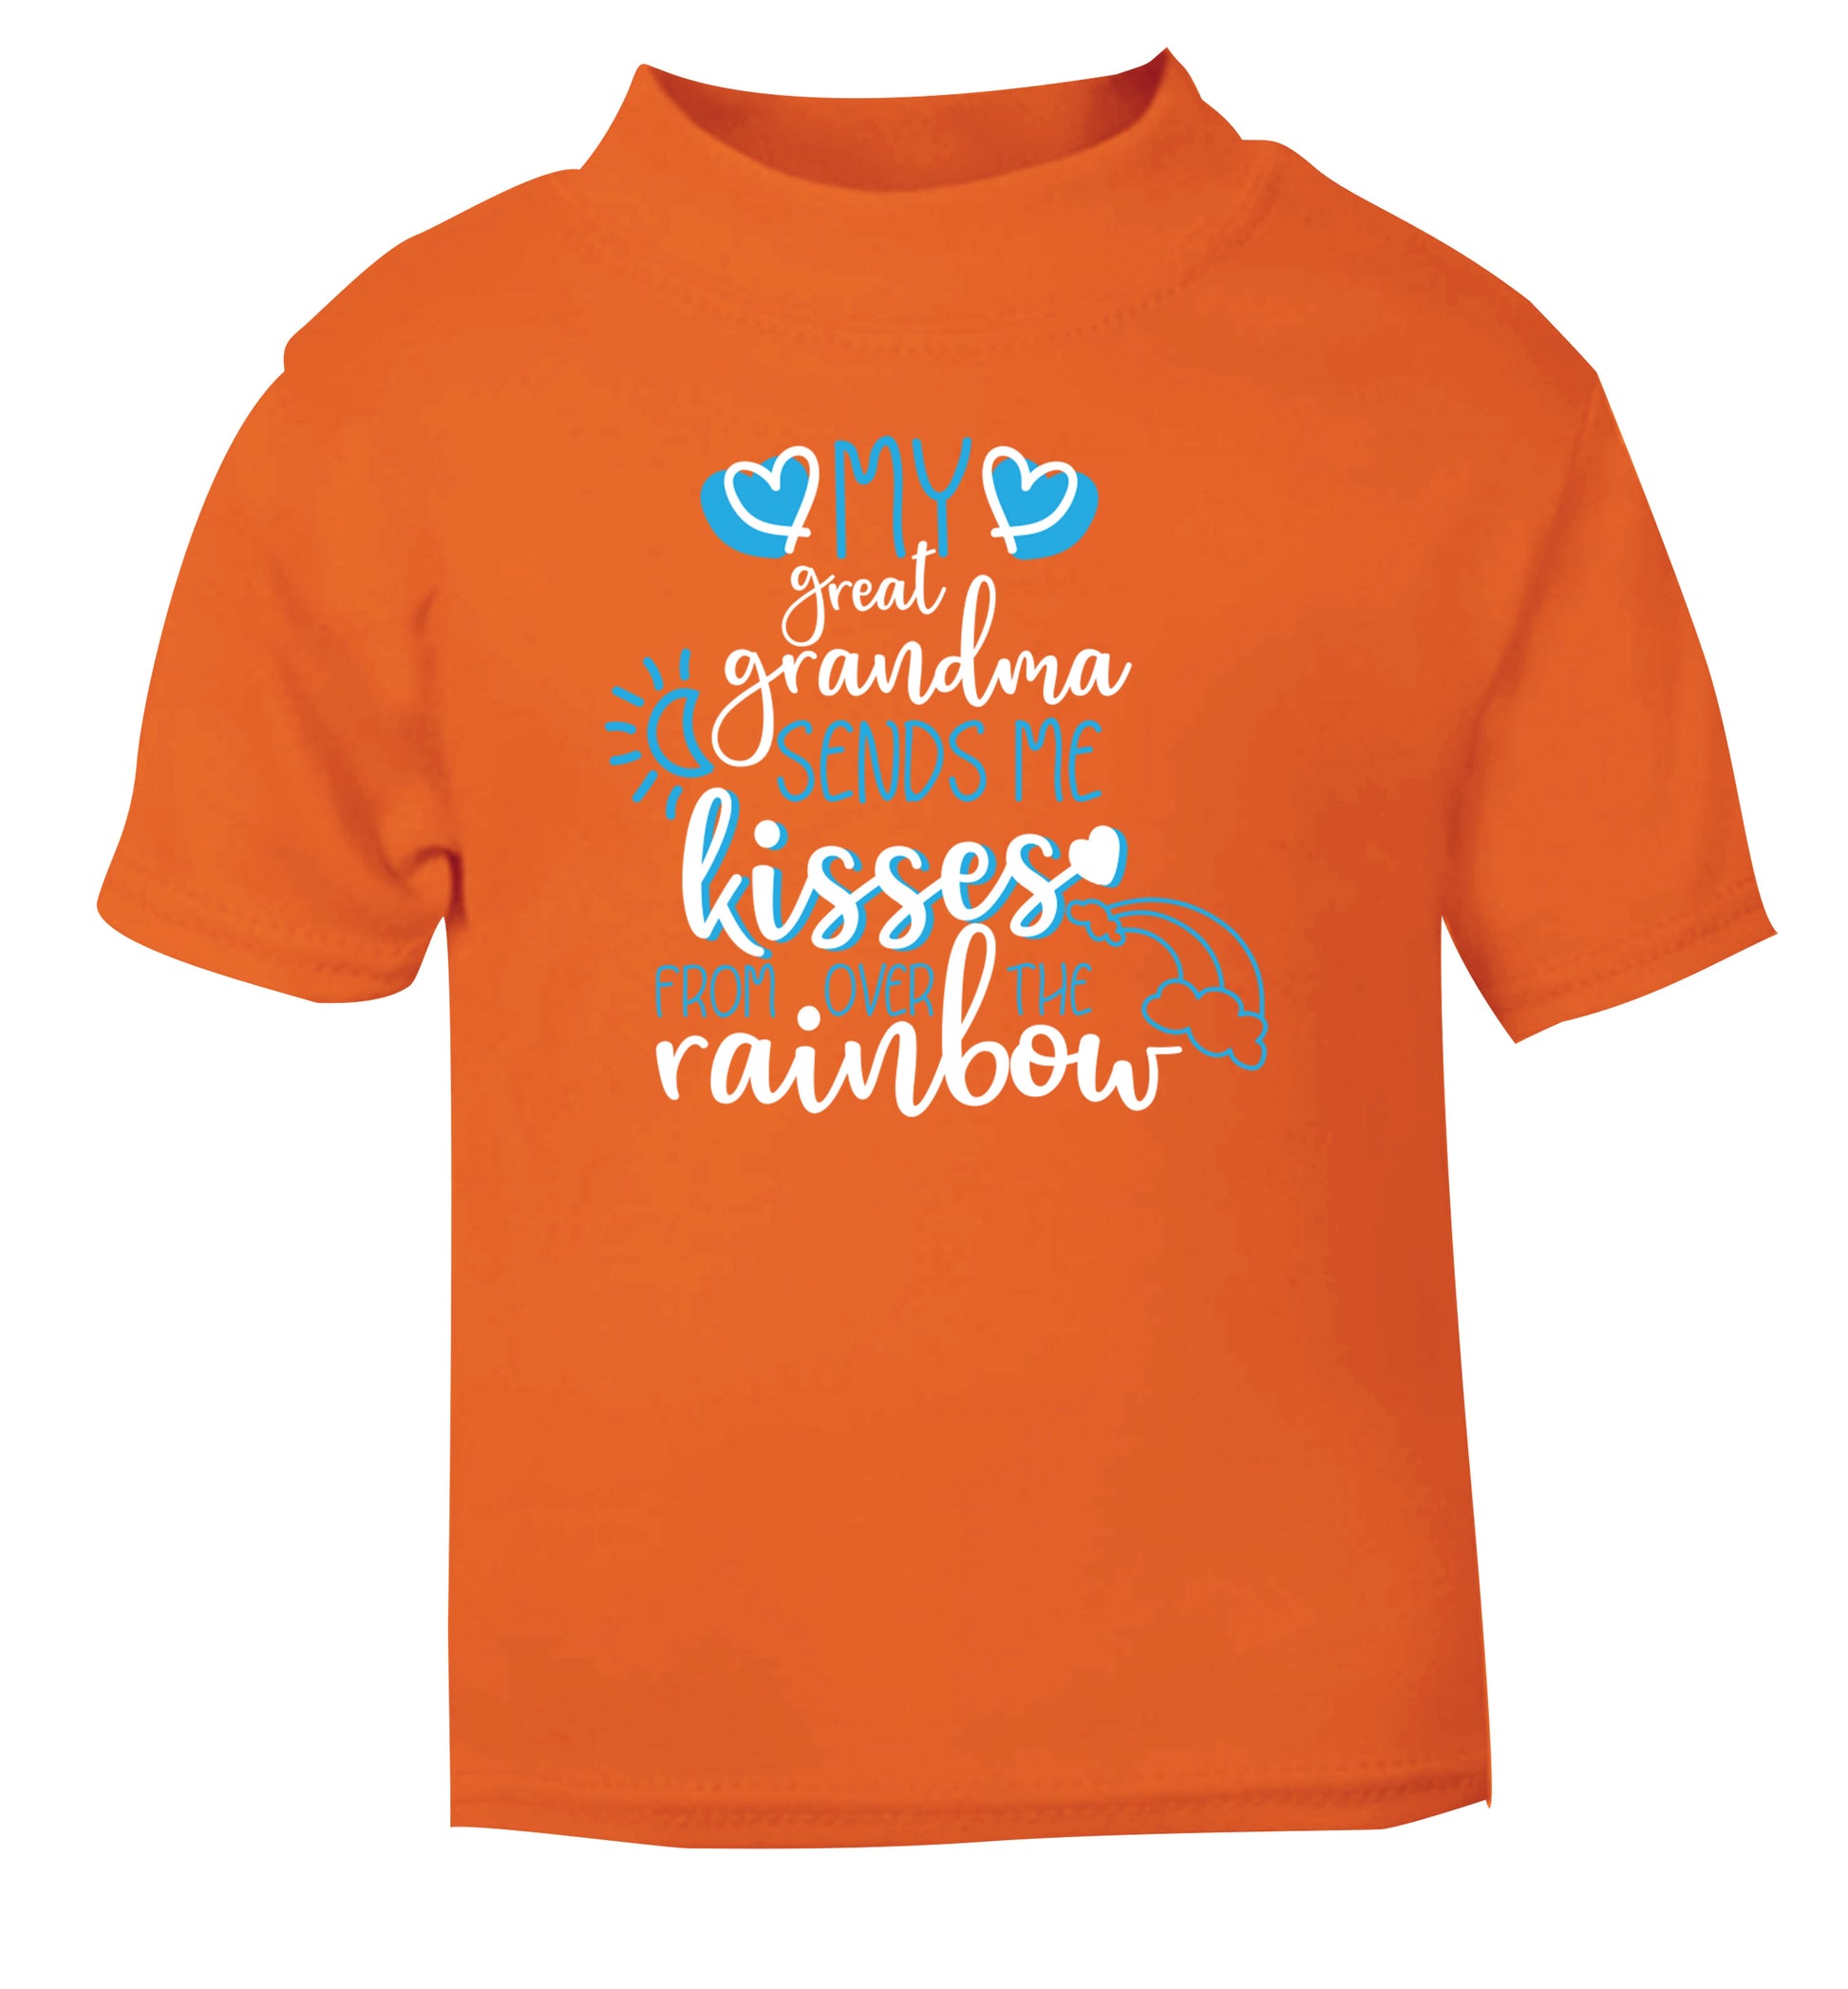 My great grandma sends me kisses from over the rainbow orange Baby Toddler Tshirt 2 Years